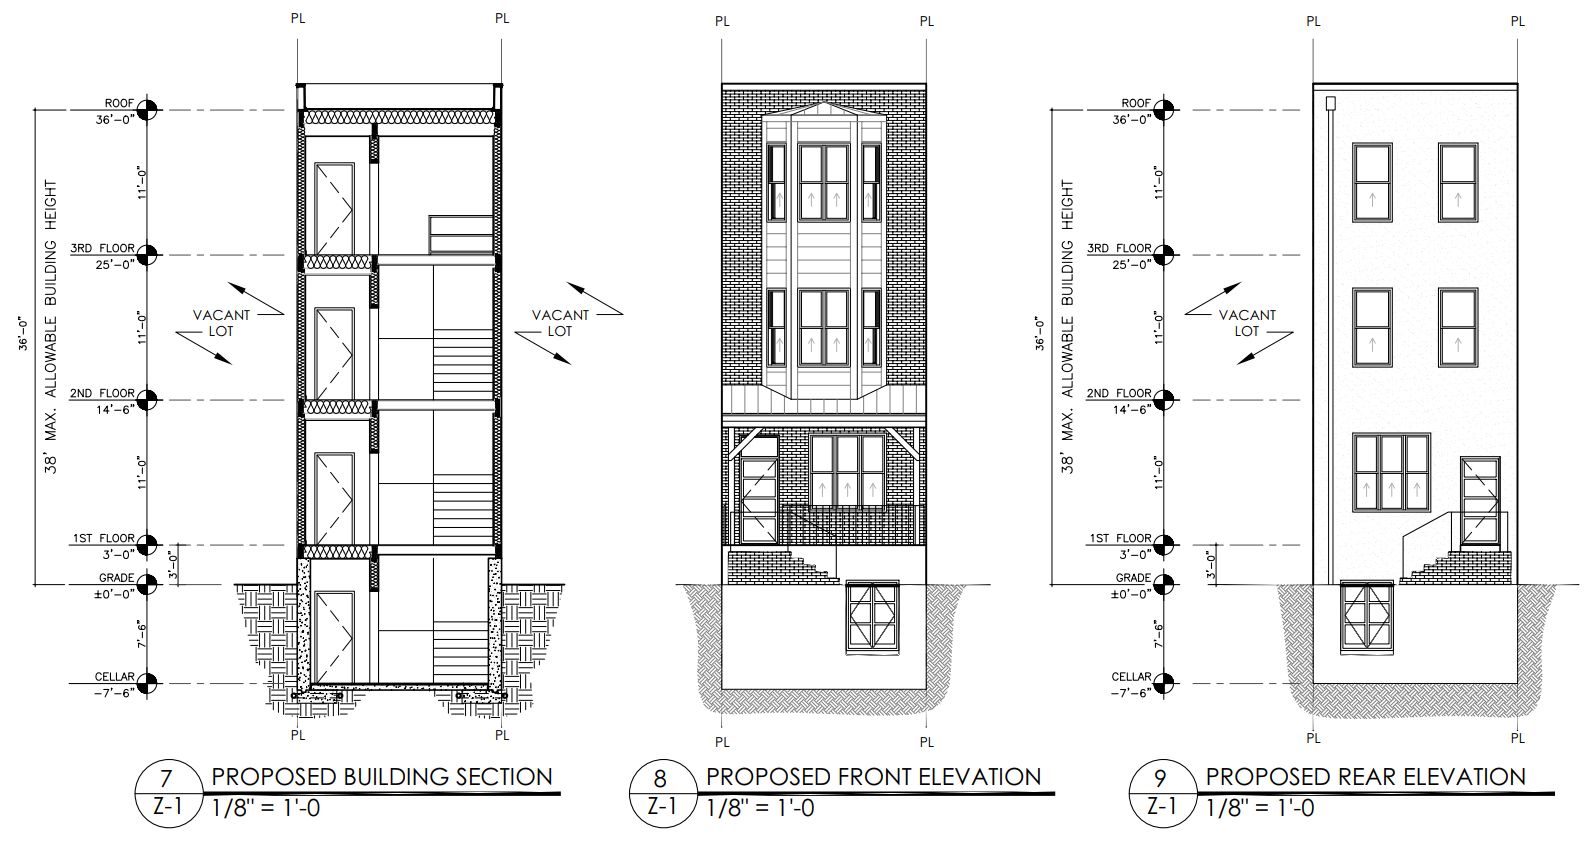 1715 North 42nd Street. Building elevation and sections. Credit: Stuart G. Rosenberg Architects (SgRA)